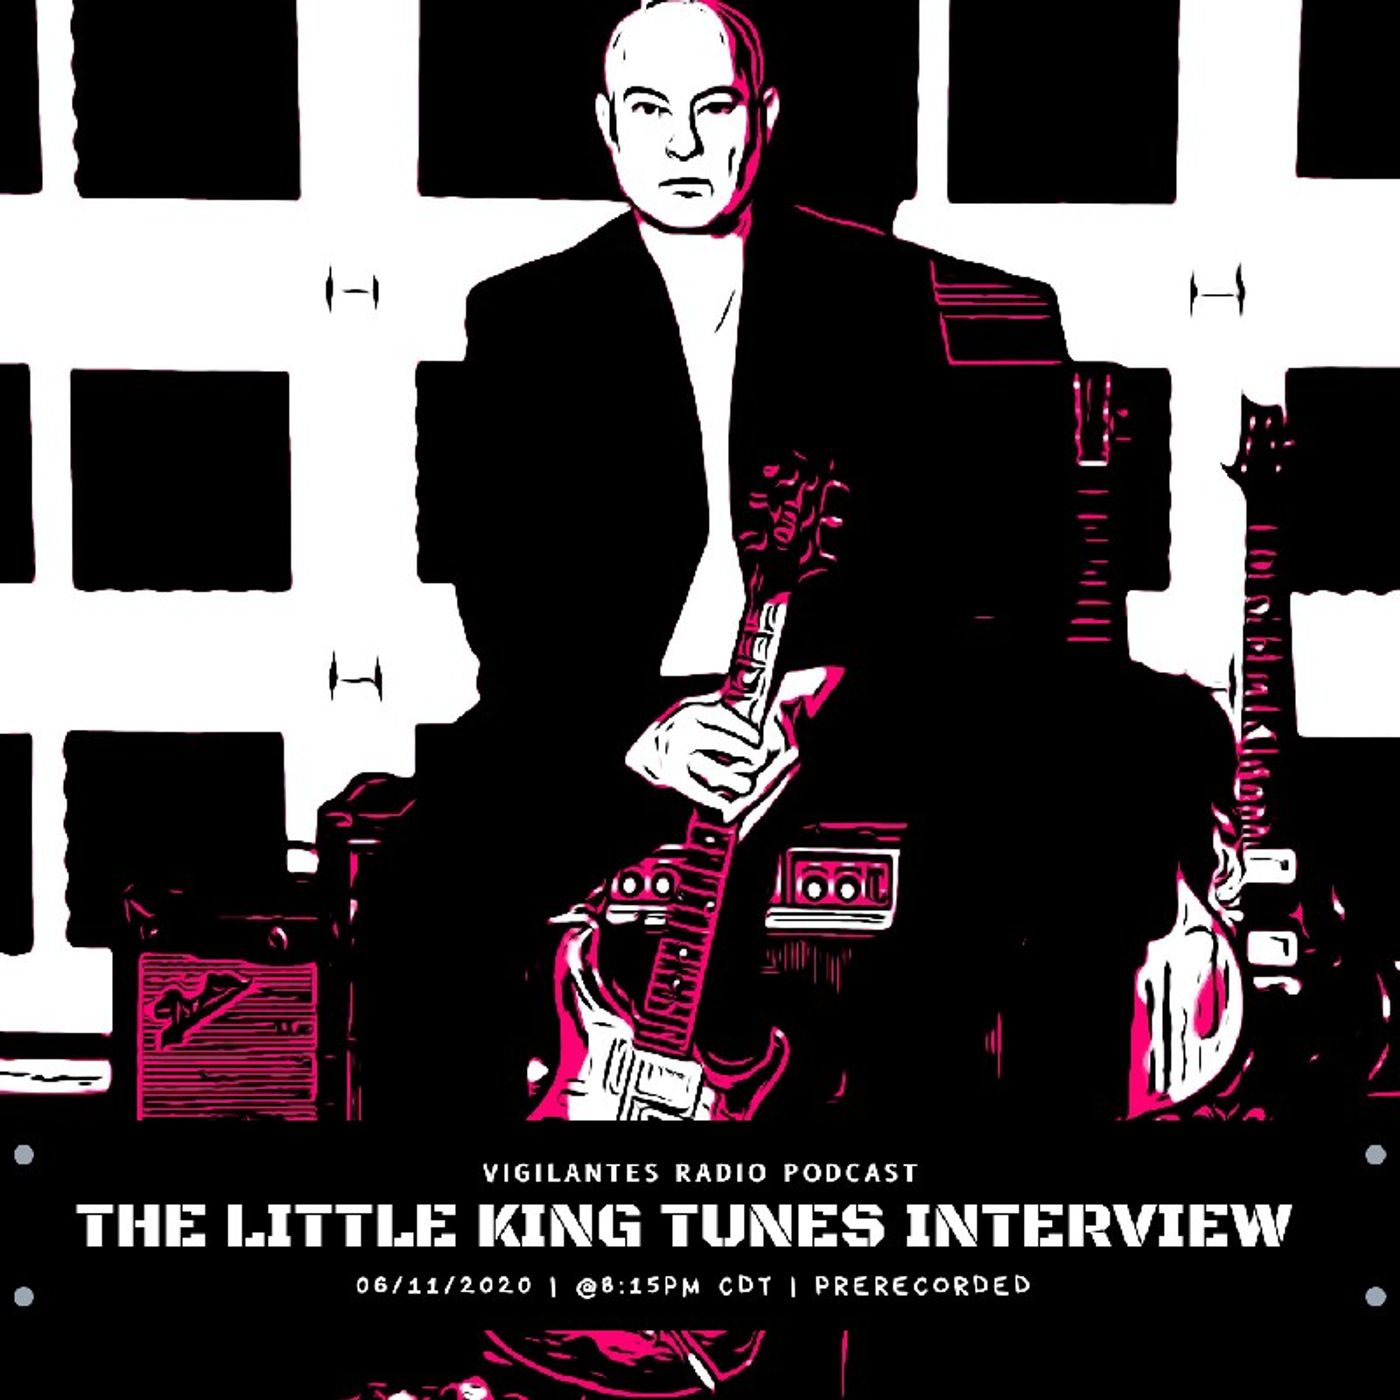 The Little King Tunes Interview. Image